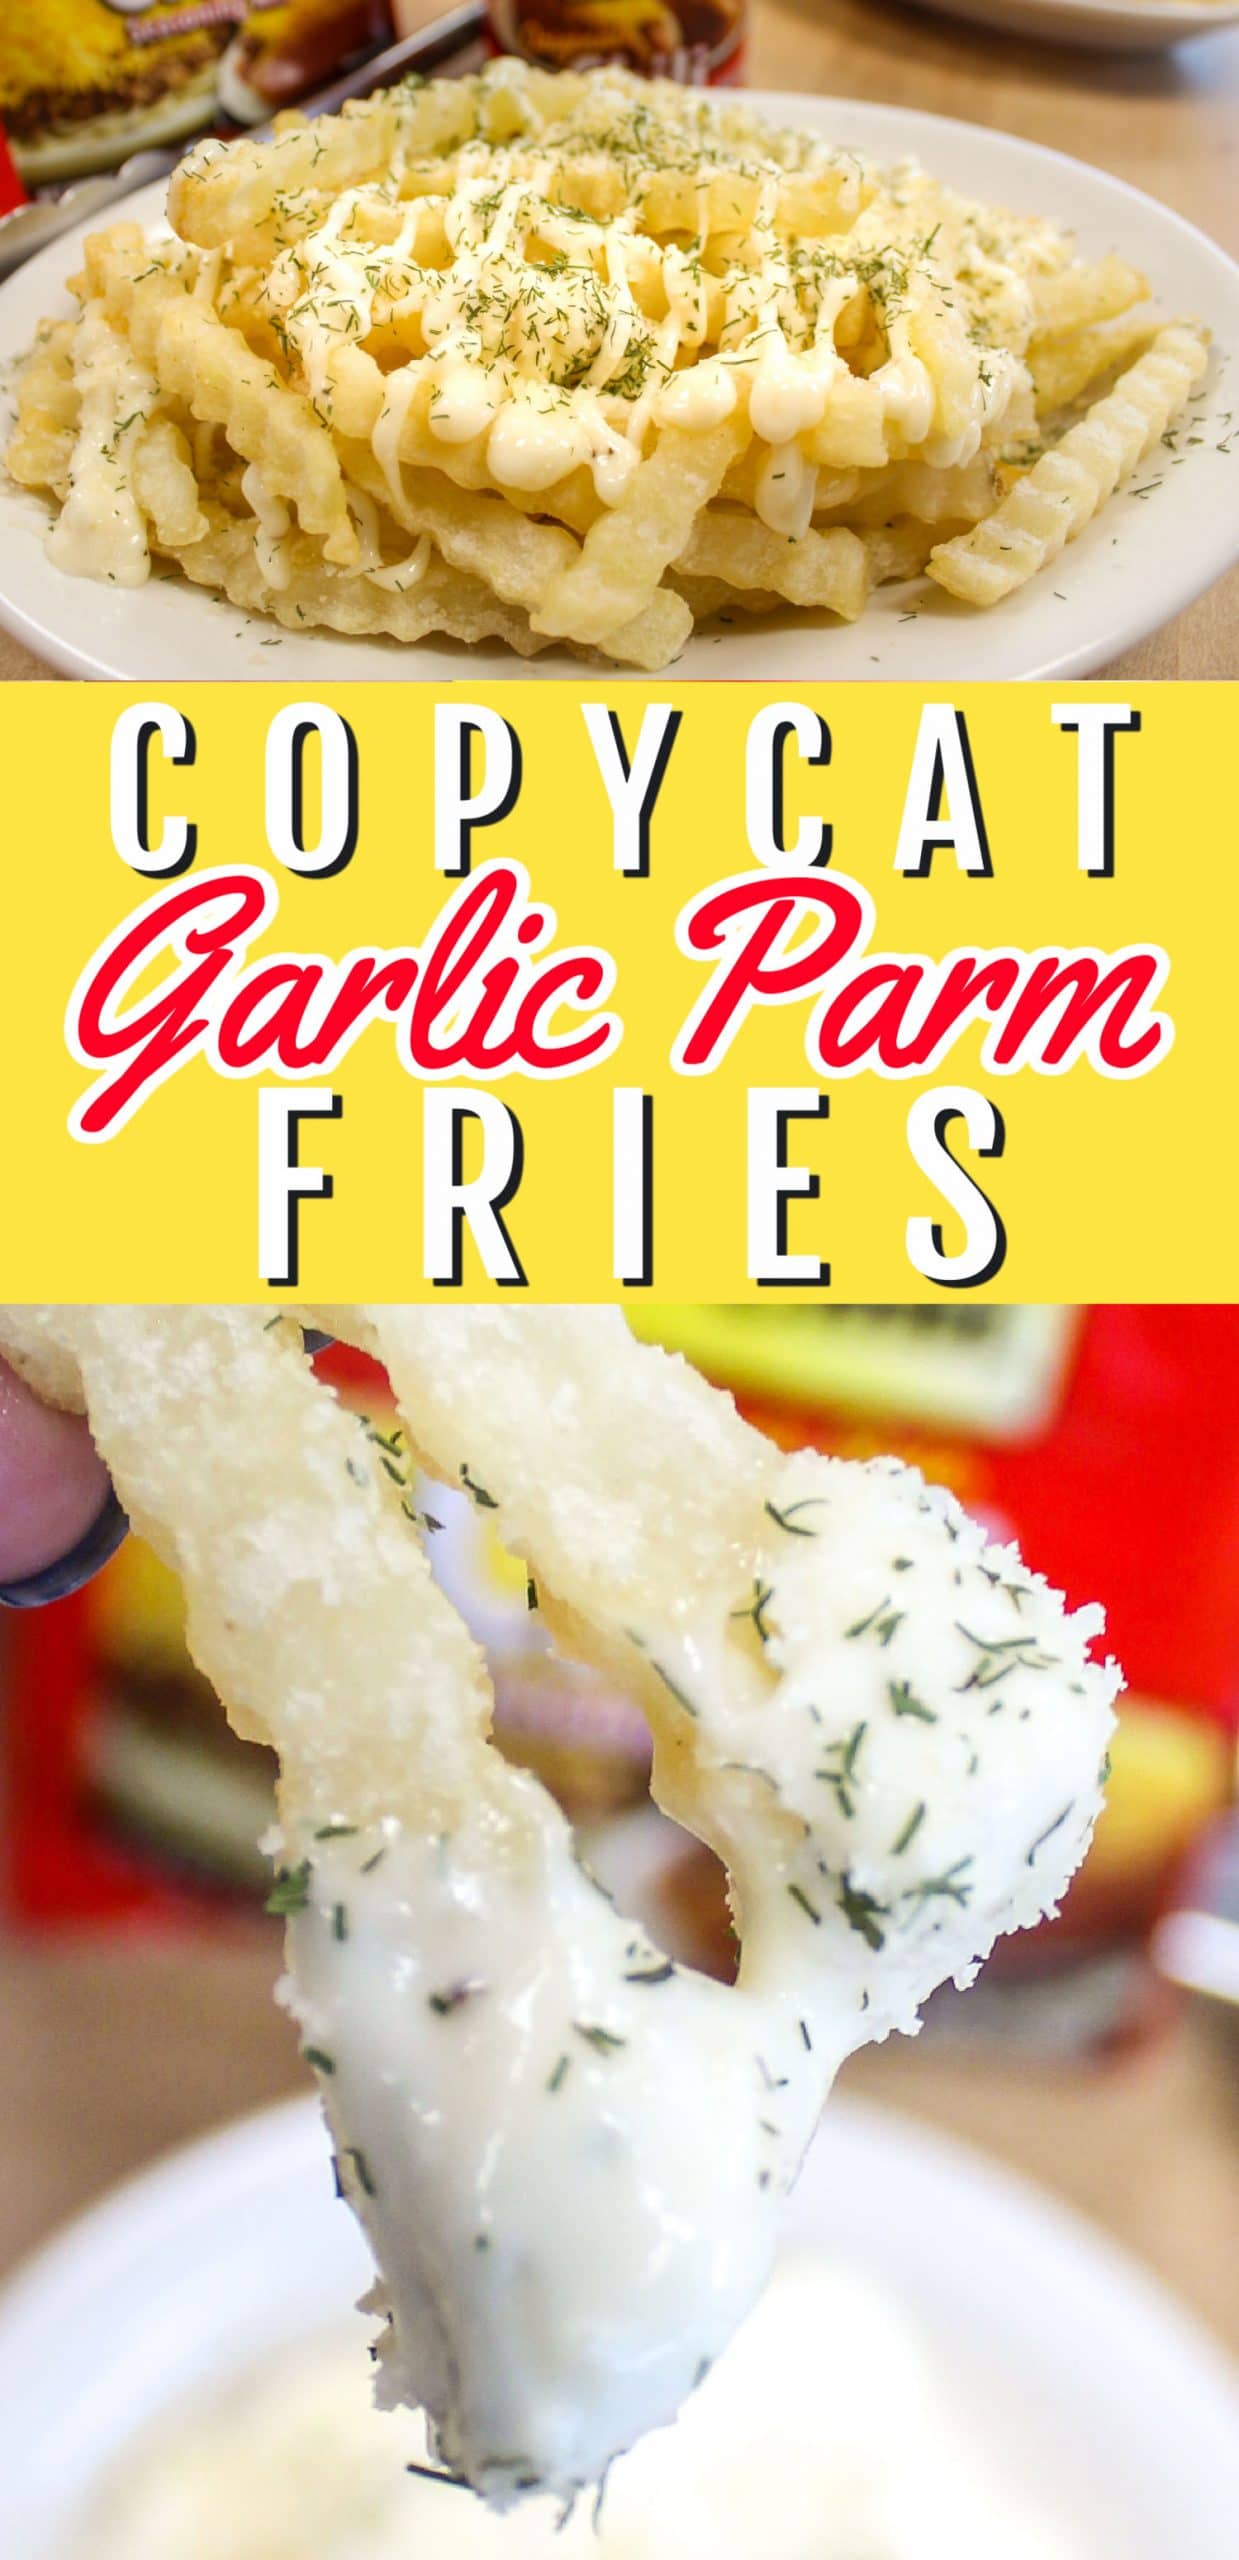 Gold Star Chili's Garlic Parmesan Fries are SO AMAZING! Seriously - I've worked with Gold Star Chili for a few years and when they introduced these fries - everybody at the dinner was scarfing them down! They're crinkle fries topped with this yummy Garlic Aioli then sprinkled with Parmesan and fresh dill. So good!  via @foodhussy